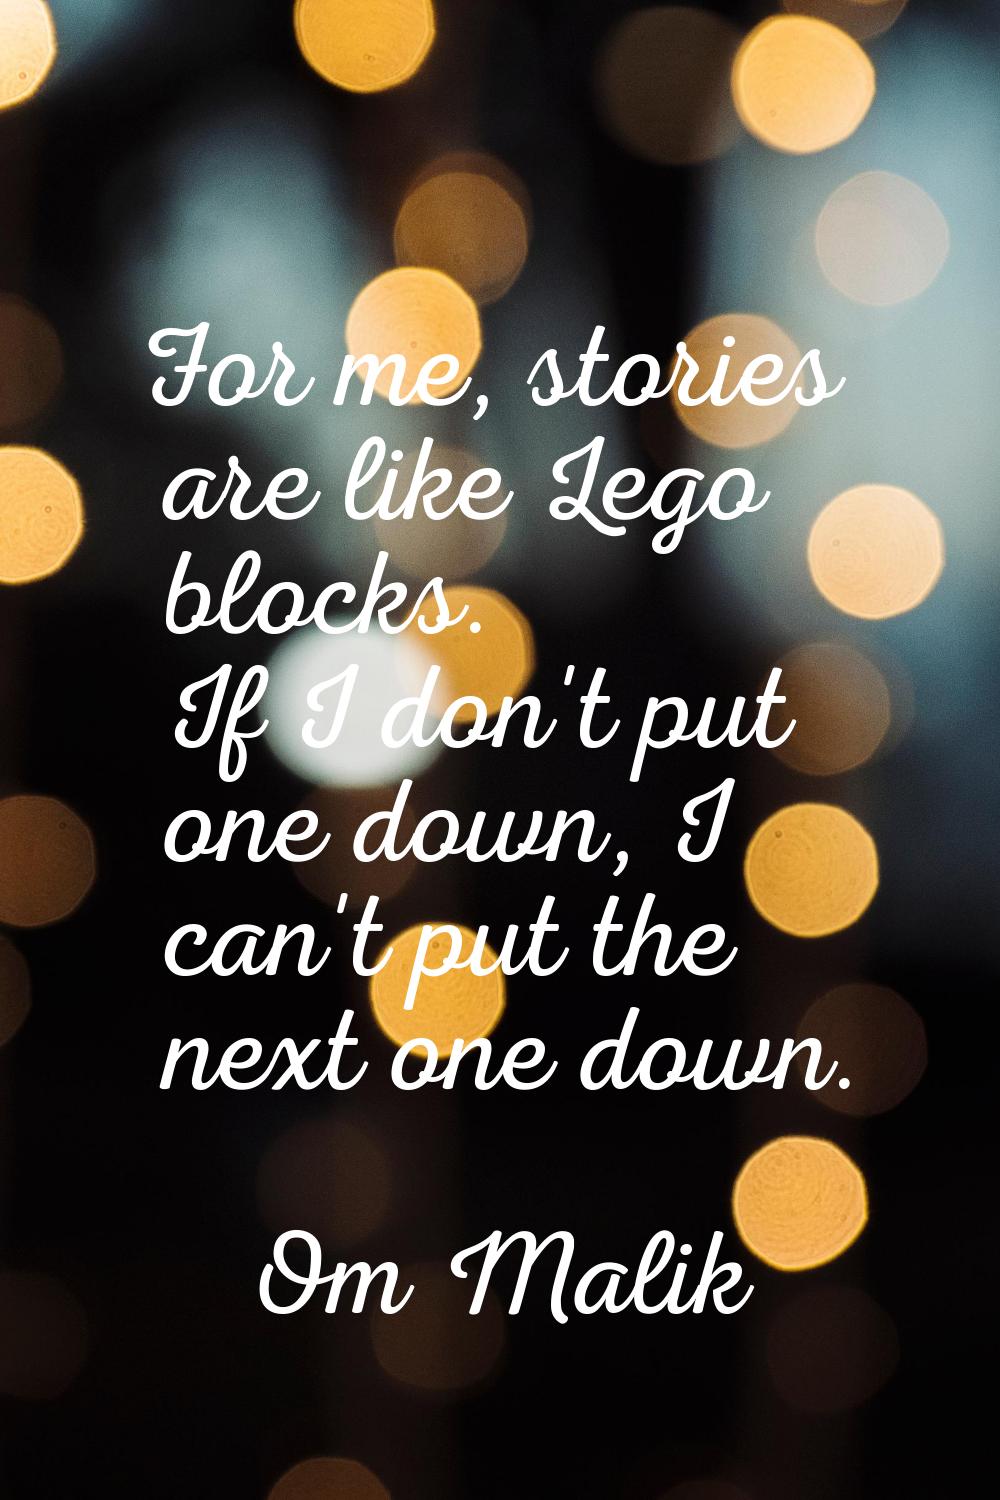 For me, stories are like Lego blocks. If I don't put one down, I can't put the next one down.